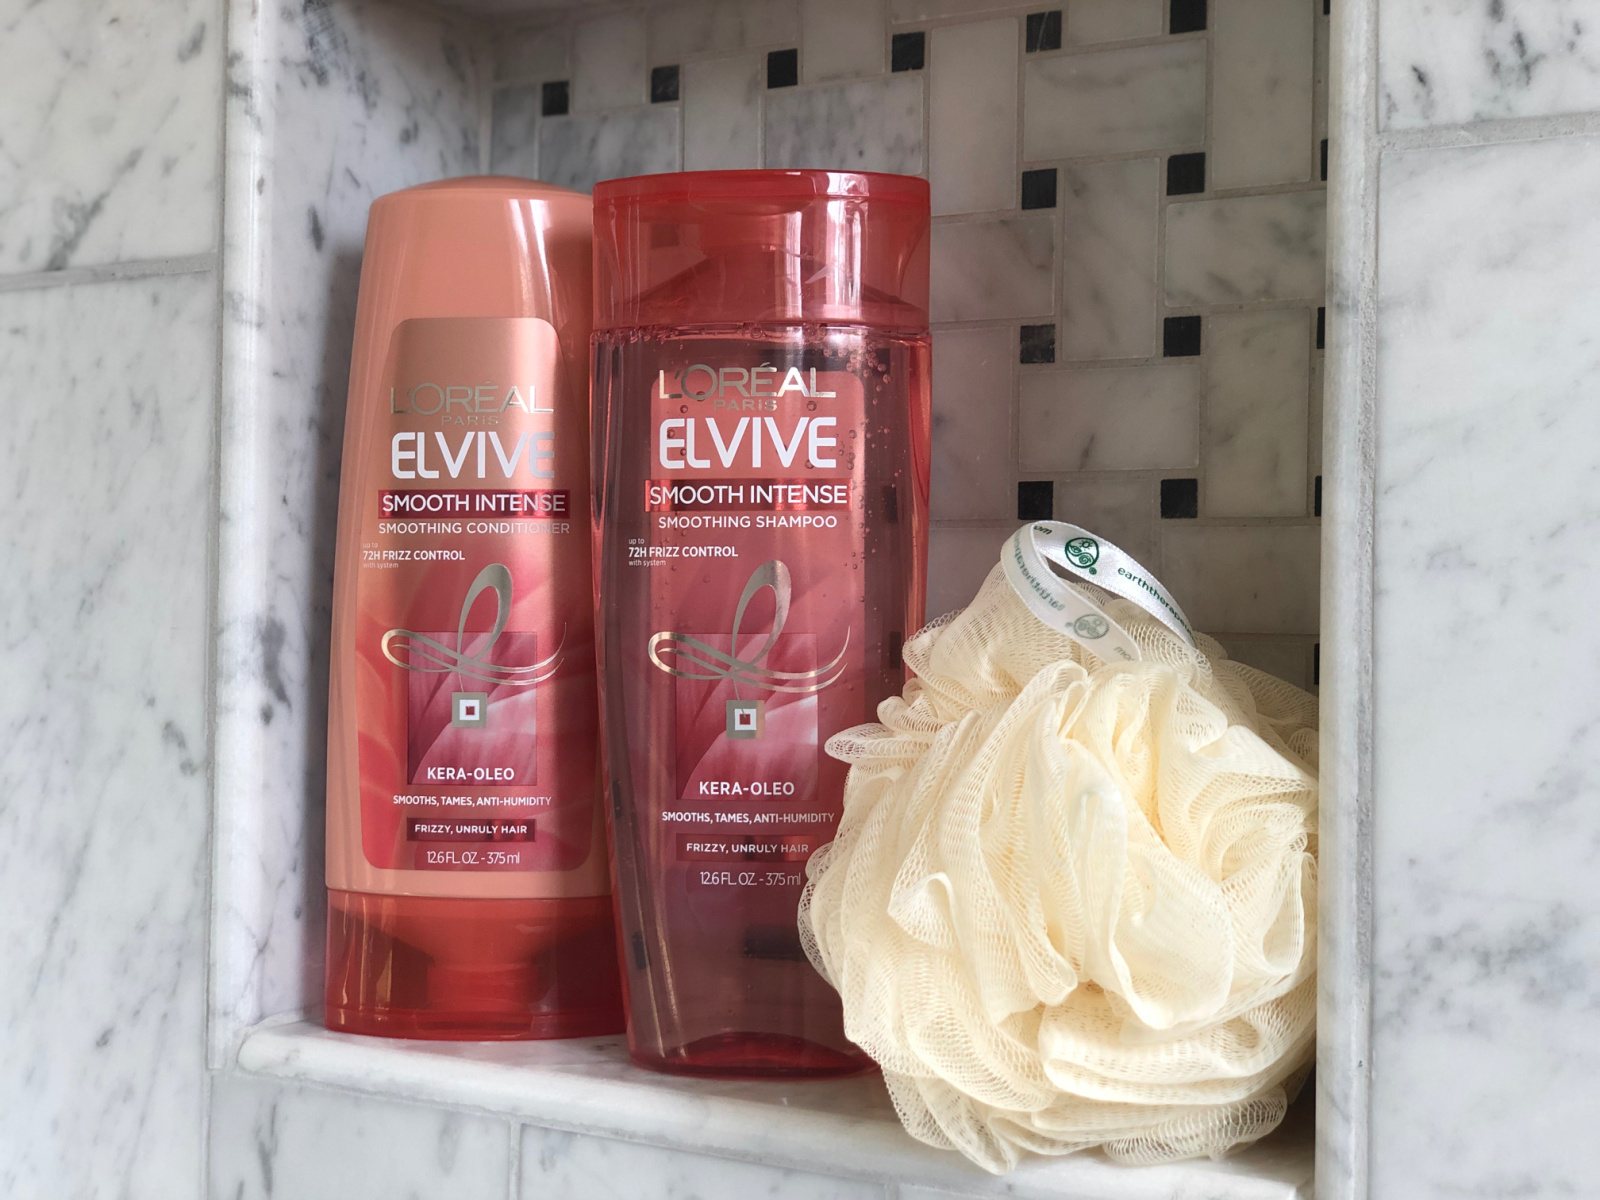 L’Oreal Elvive Haircare As Low As $1.49 Per Bottle At Kroger